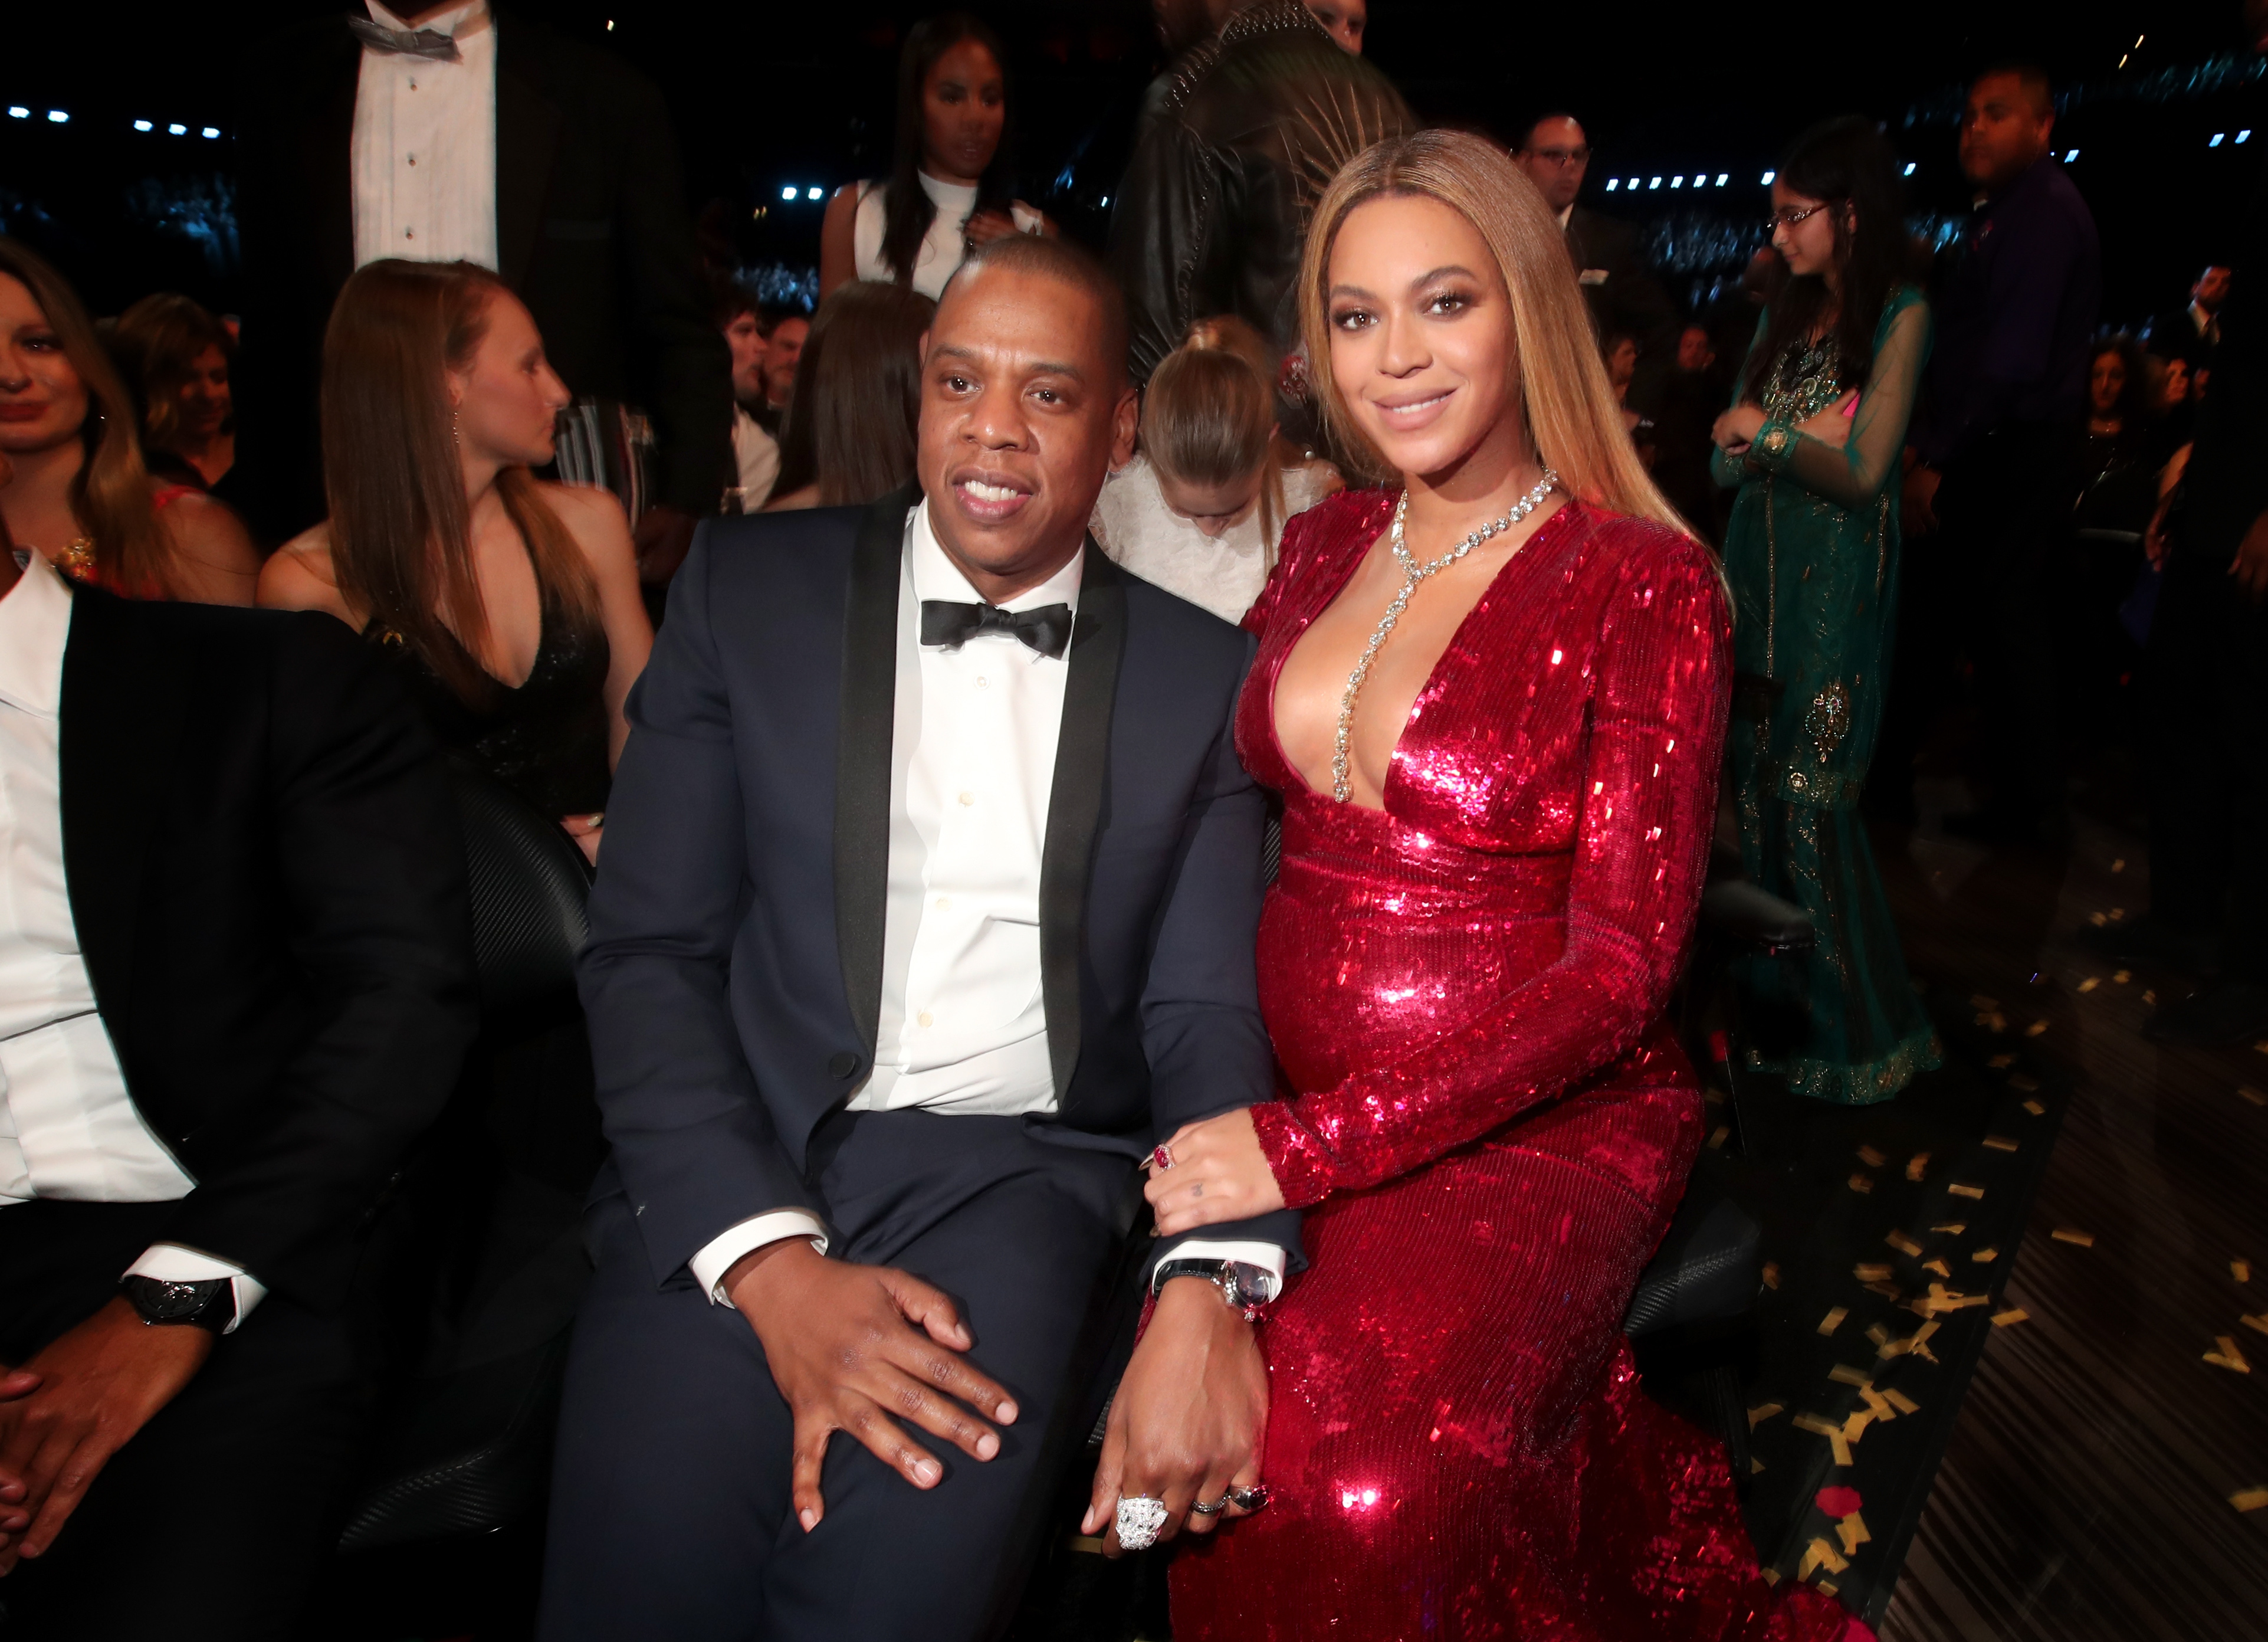 Beyonce And Jay Z’s Vancouver Tour Stop May Have Been The Best Yet